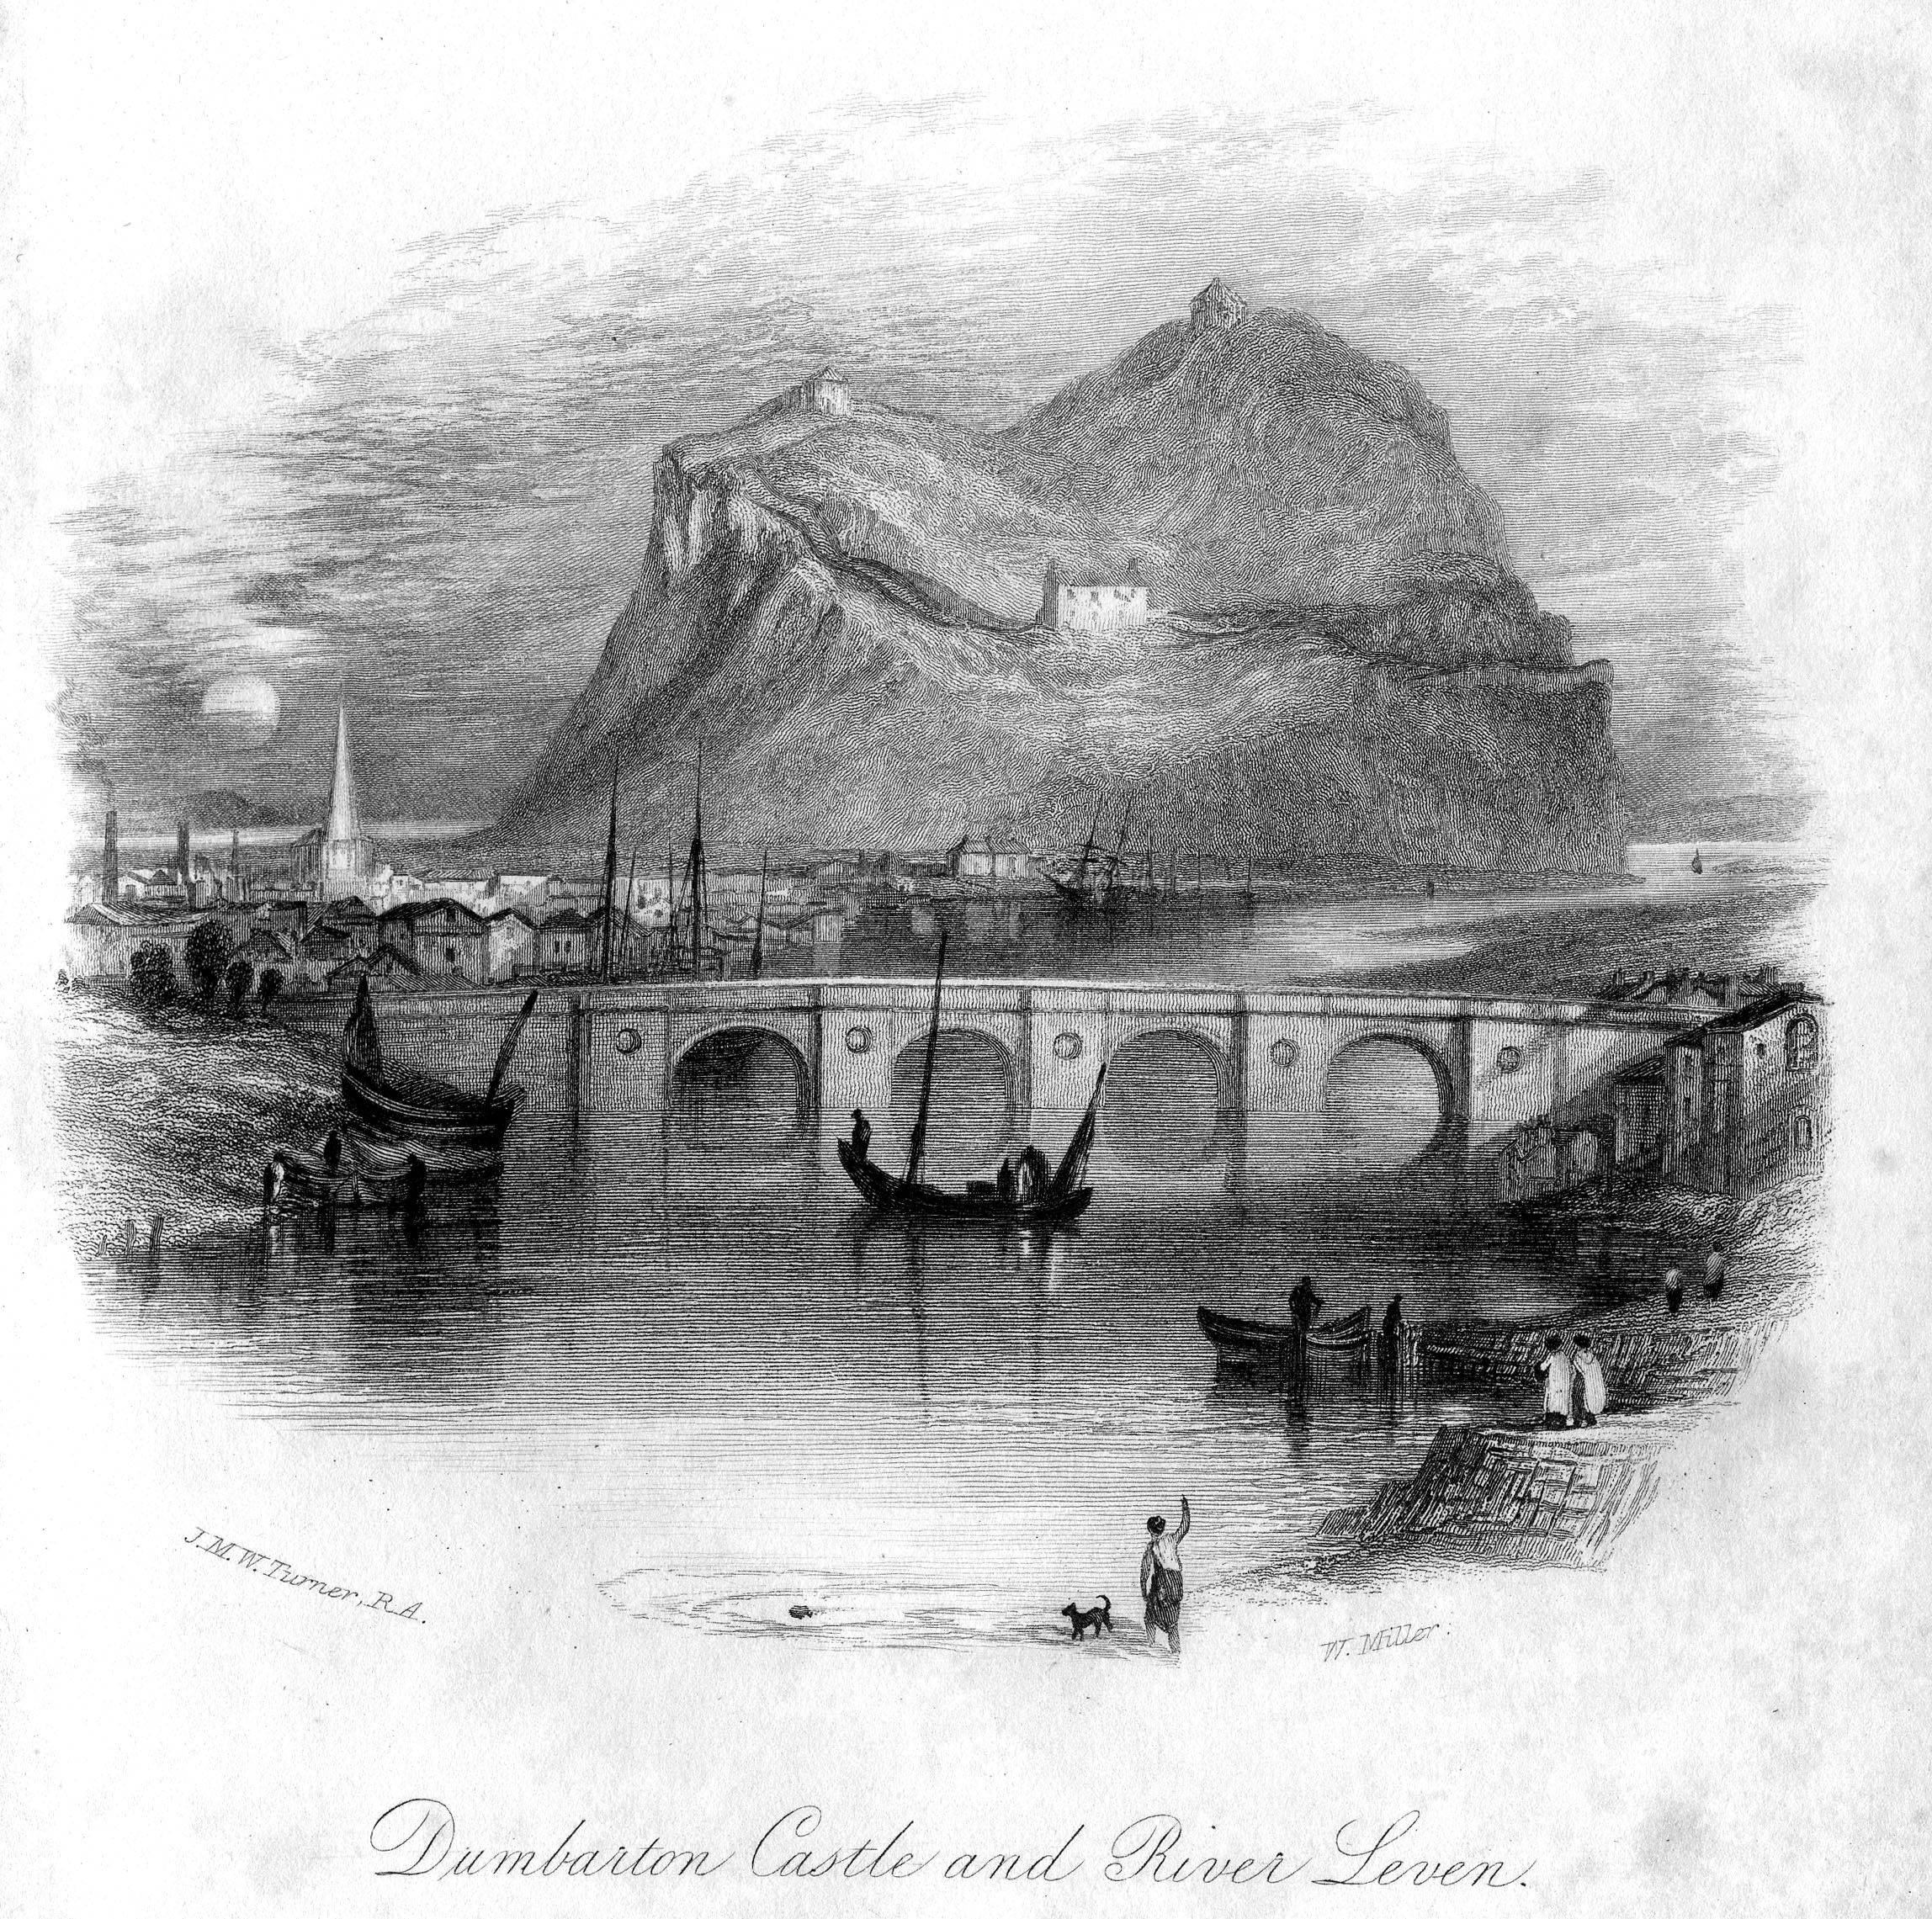 An engraving of Dumbarton Castle by William Miller.